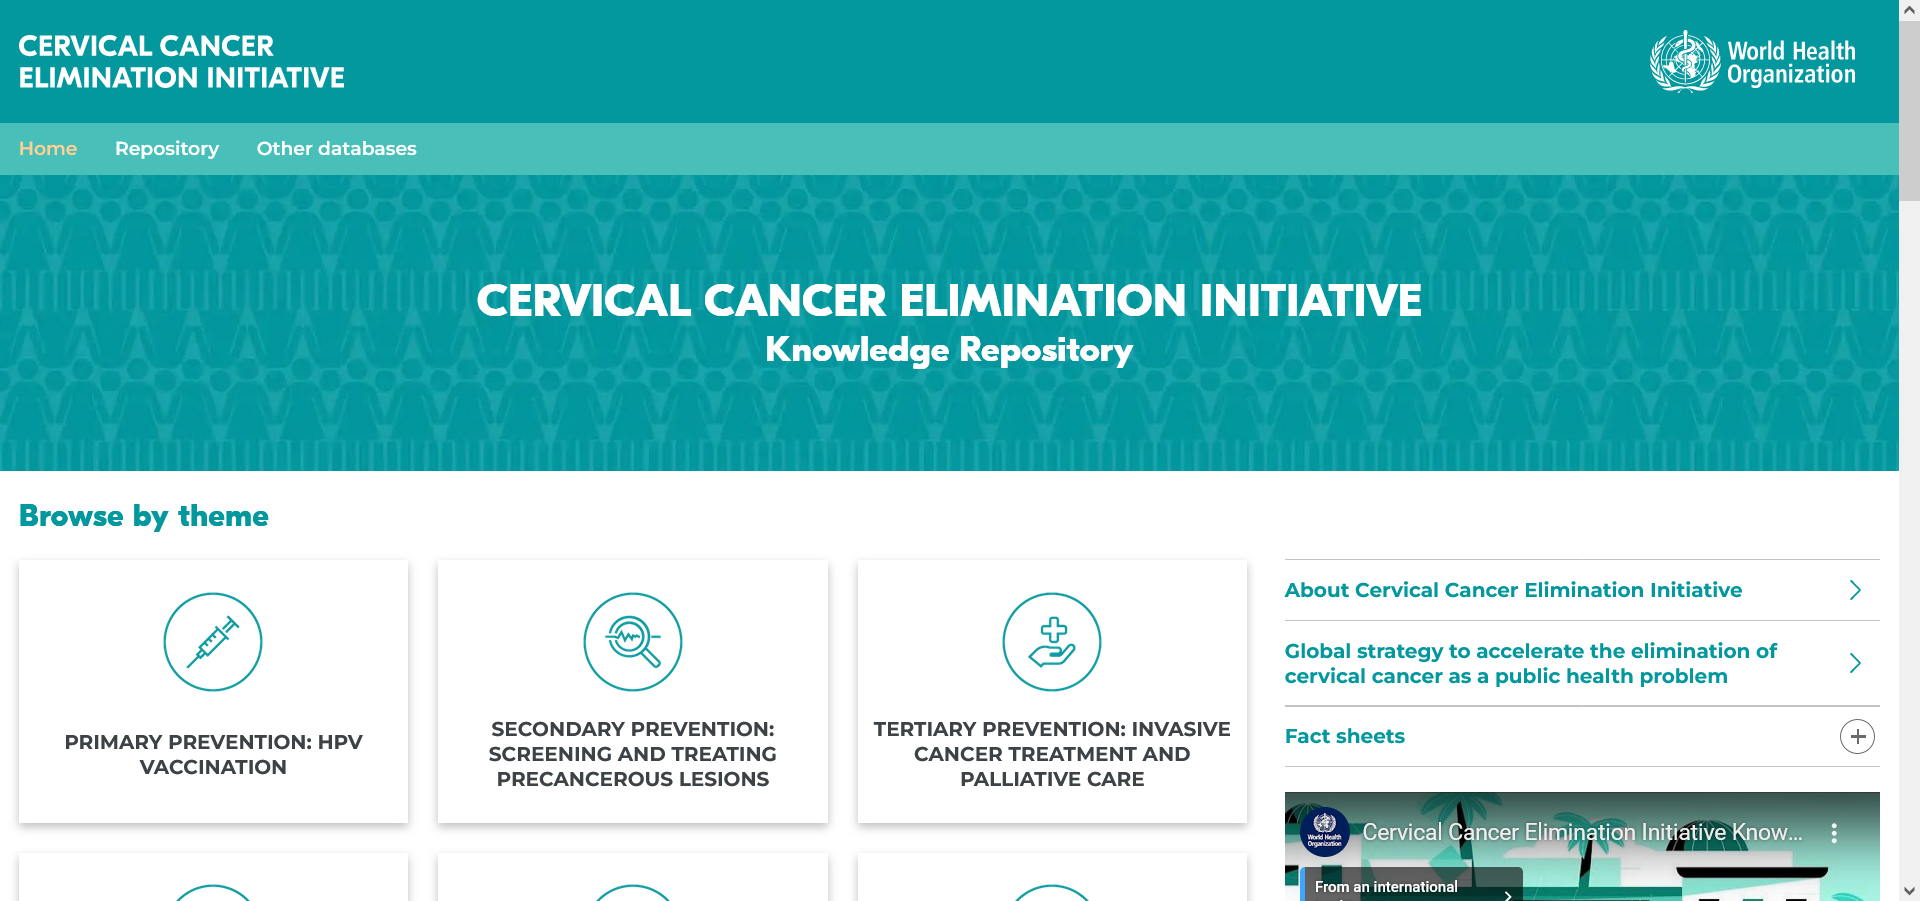 Cervical Cancer Elimination Initiative Knowledge Repository